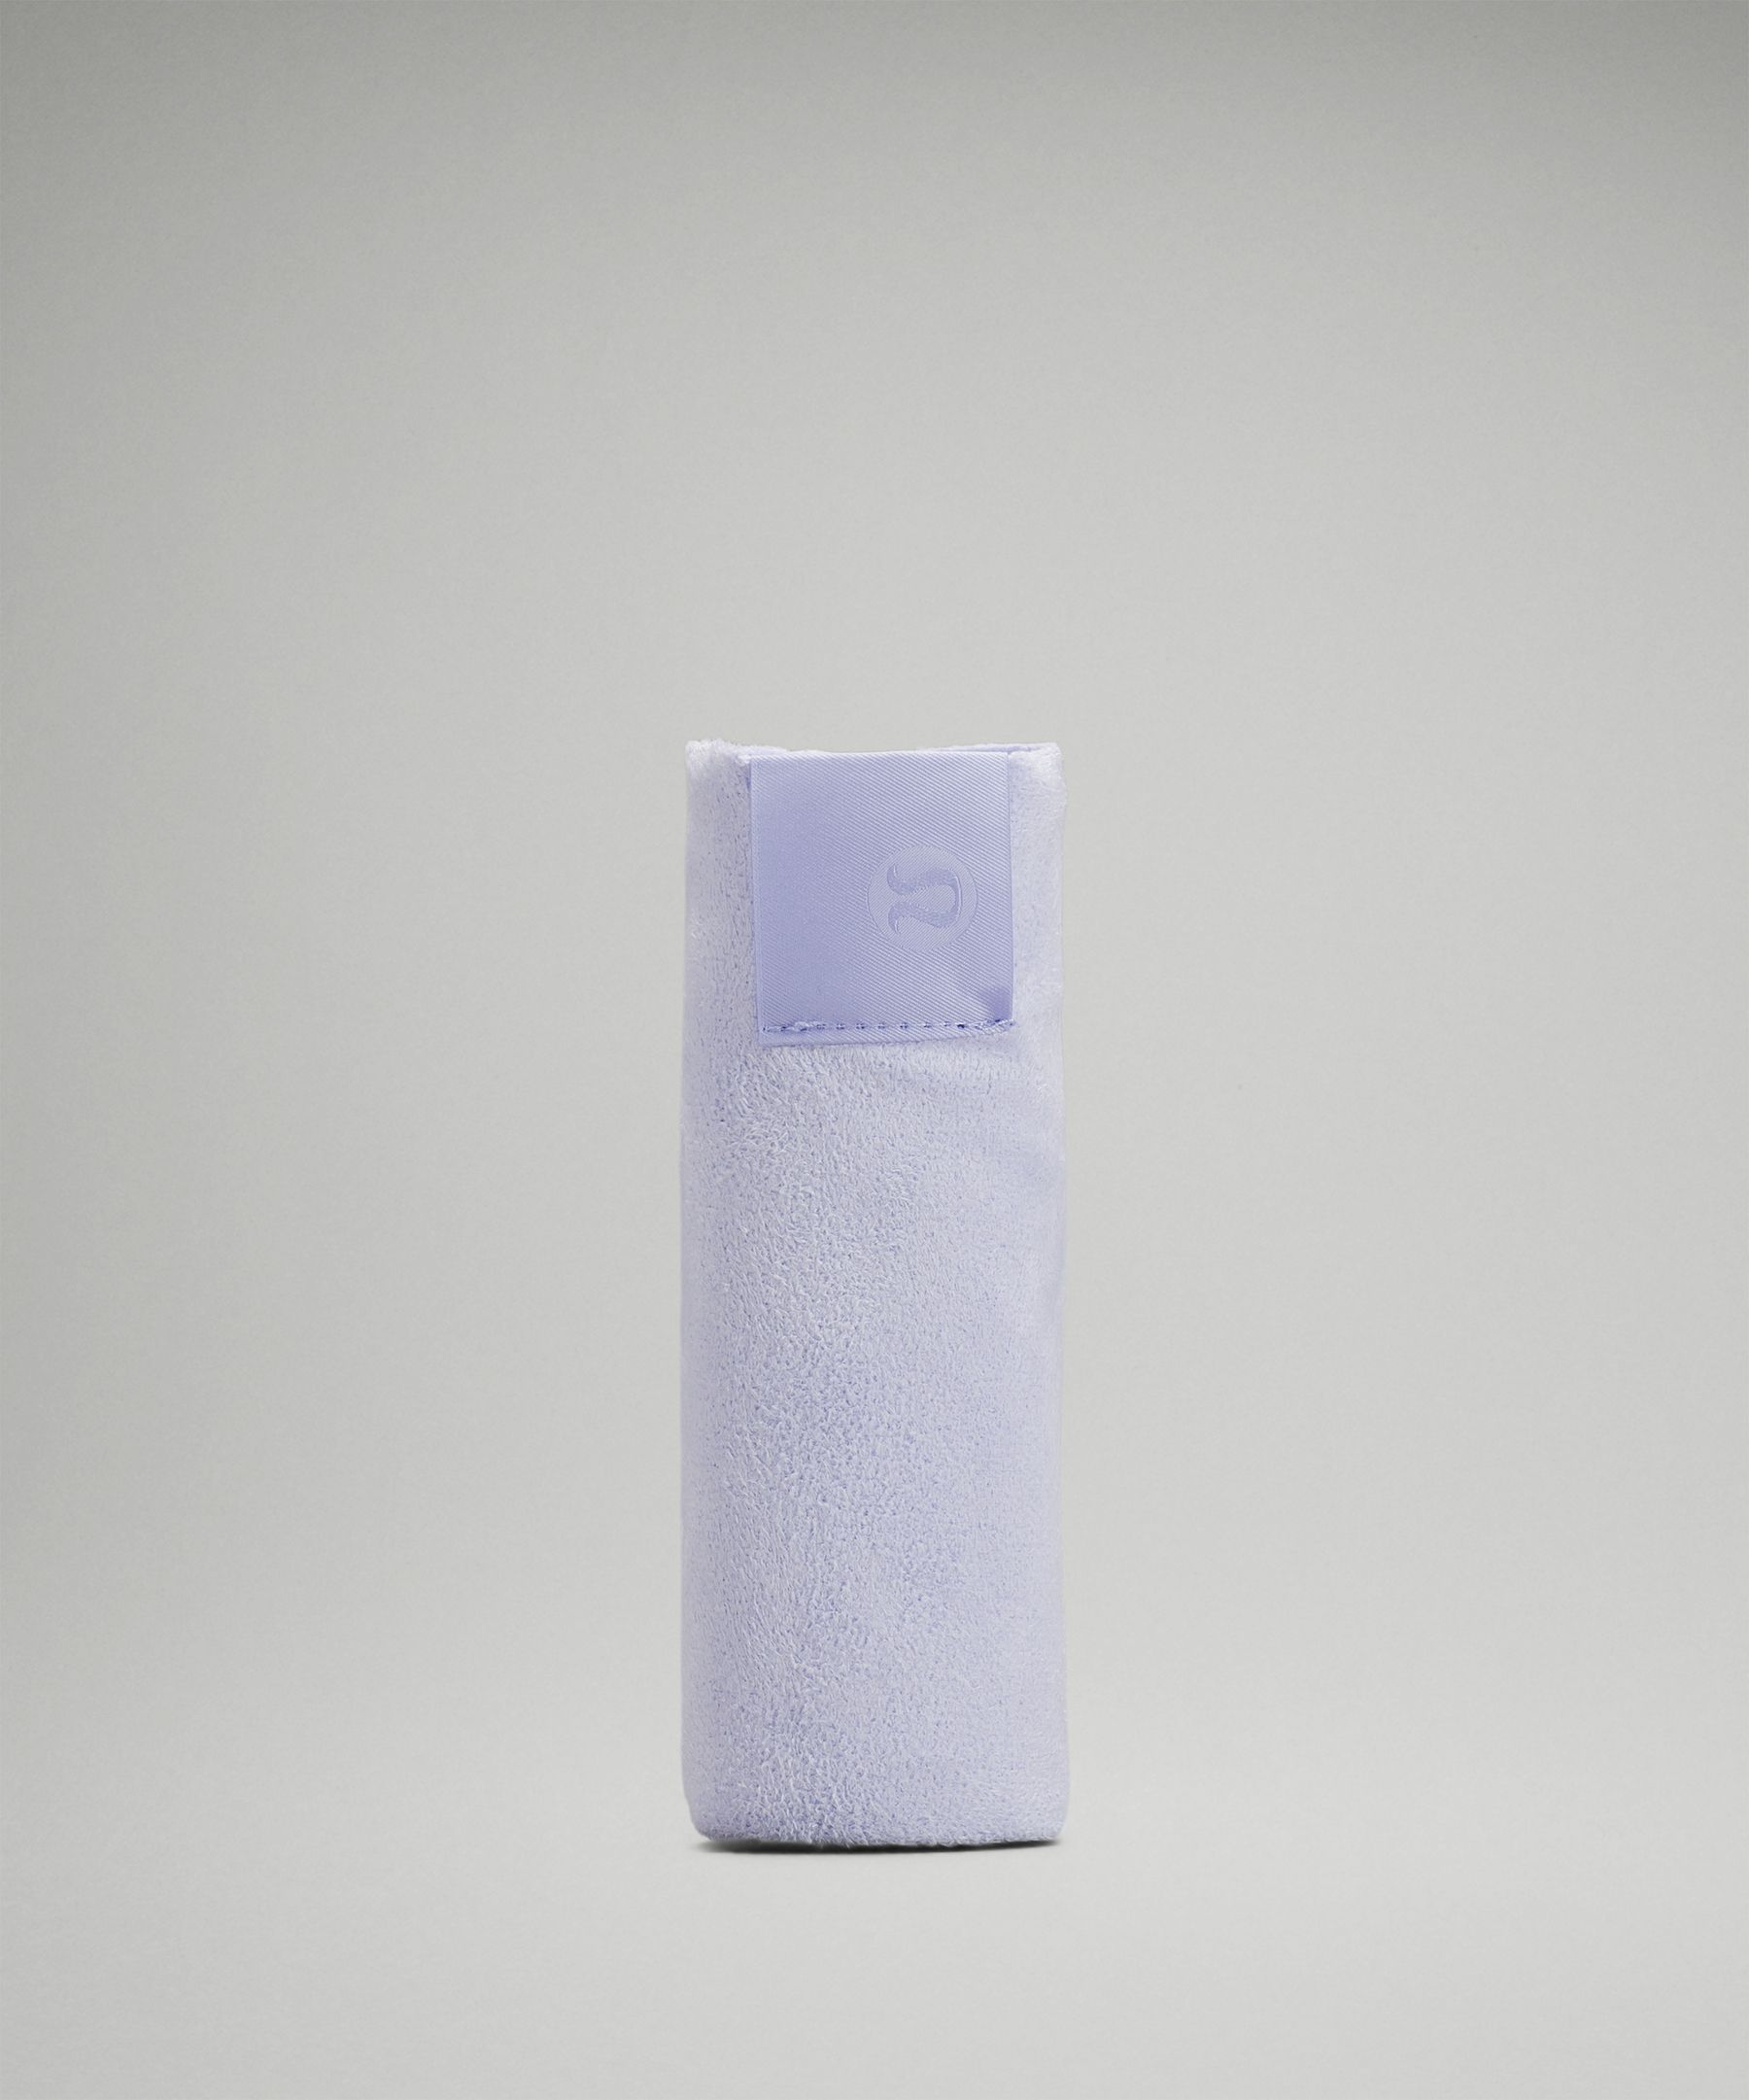 Lululemon The Small Towel In Pastel Blue